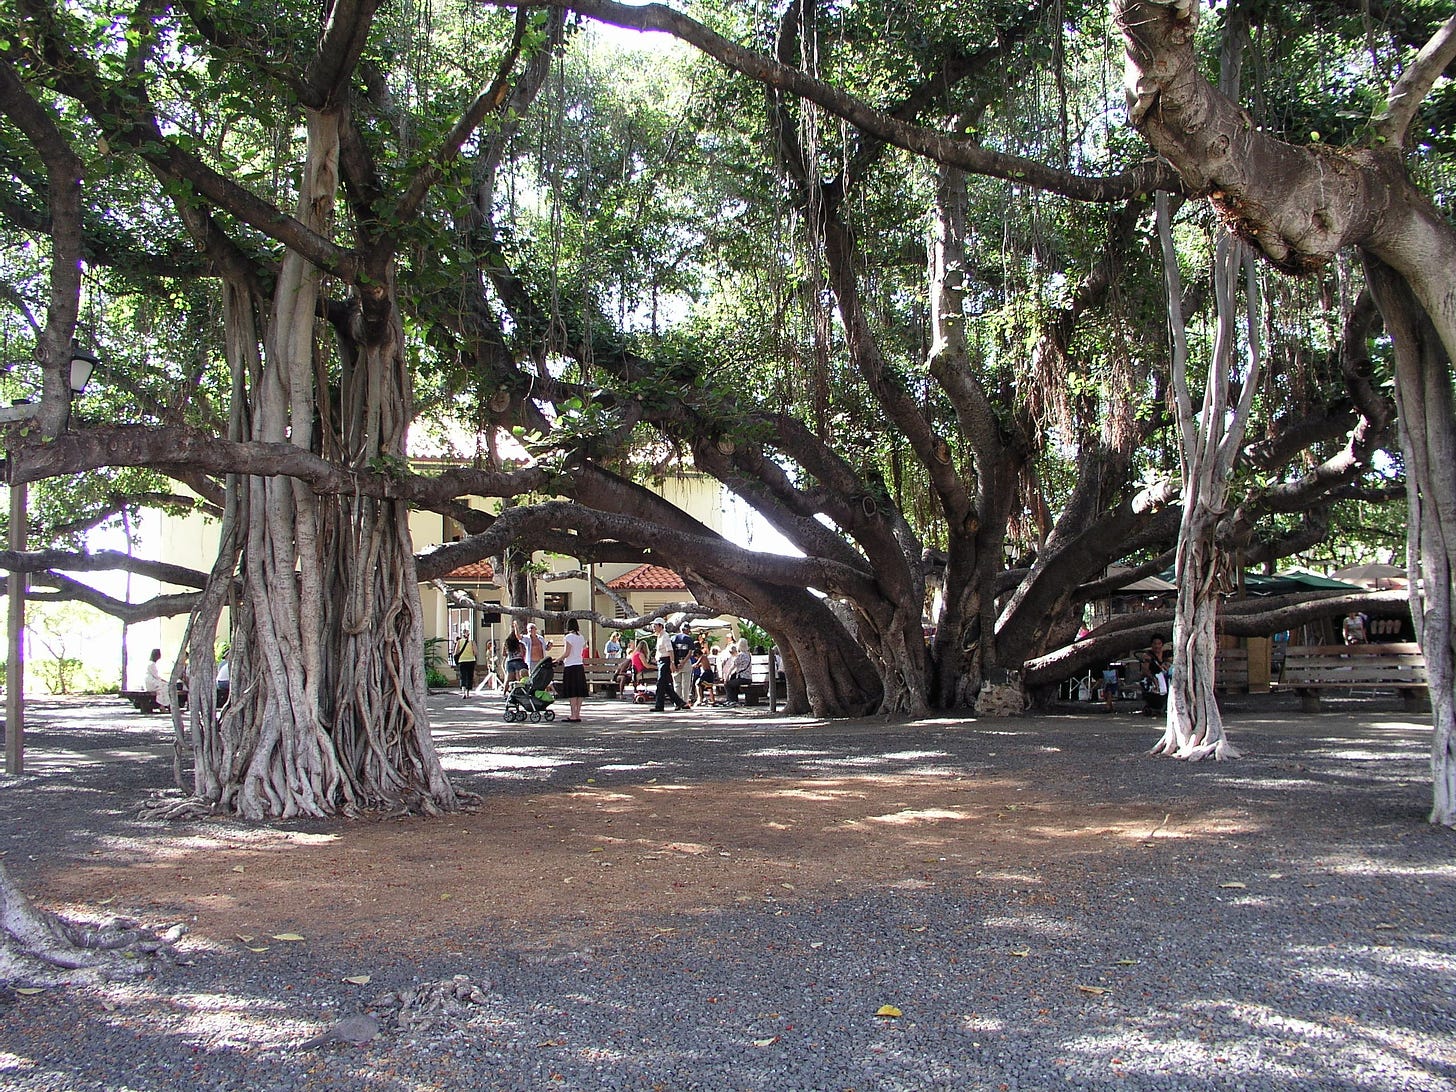 ID: Photo of multi trunk Lahaina banyan tree and aerial roots